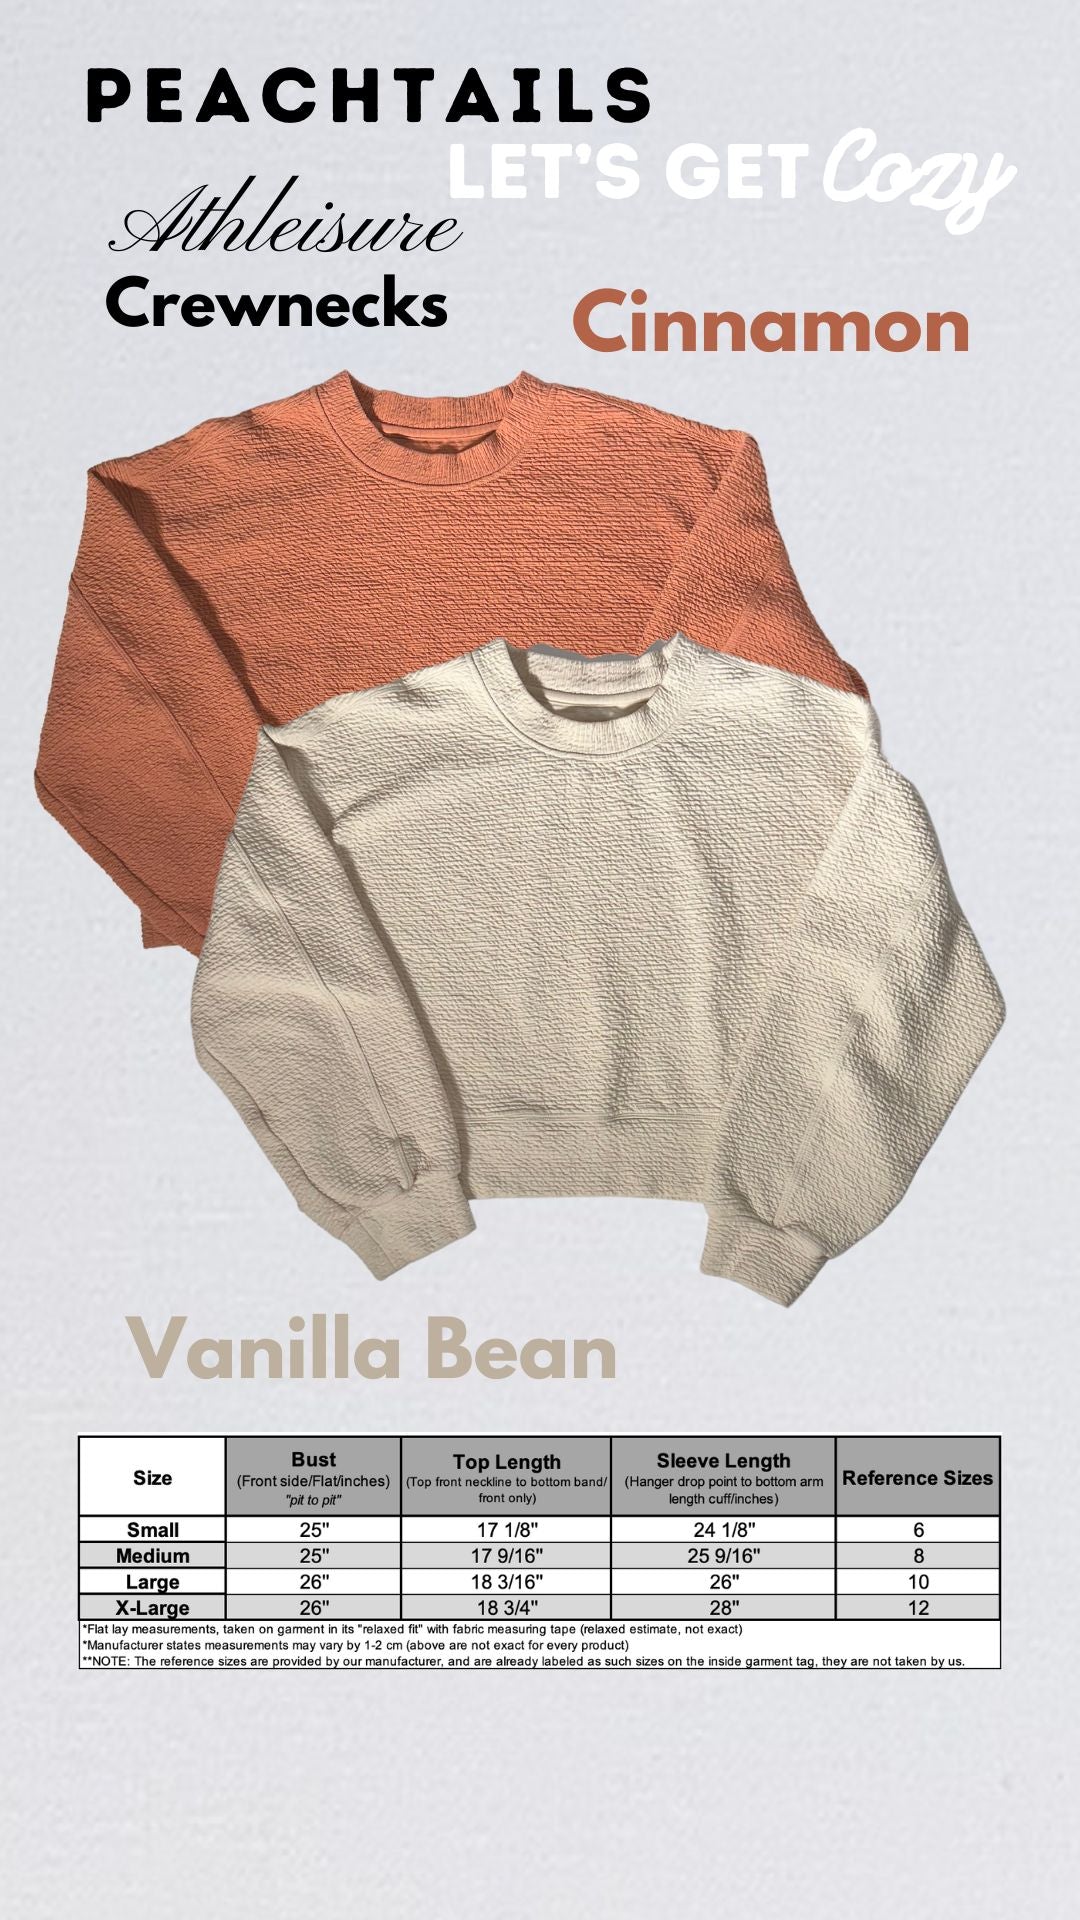 The image is an advertisement for Peachtails Athleisure Crewnecks, with the text "Let's Get Cozy" and flavor names "Cinnamon" and "Vanilla Bean." Two crewneck sweaters are displayed, one atop the other. Below is a size chart listing bust, top length, and sleeve length for sizes small, medium, and large, with reference sizes ranging from 6 to 12.